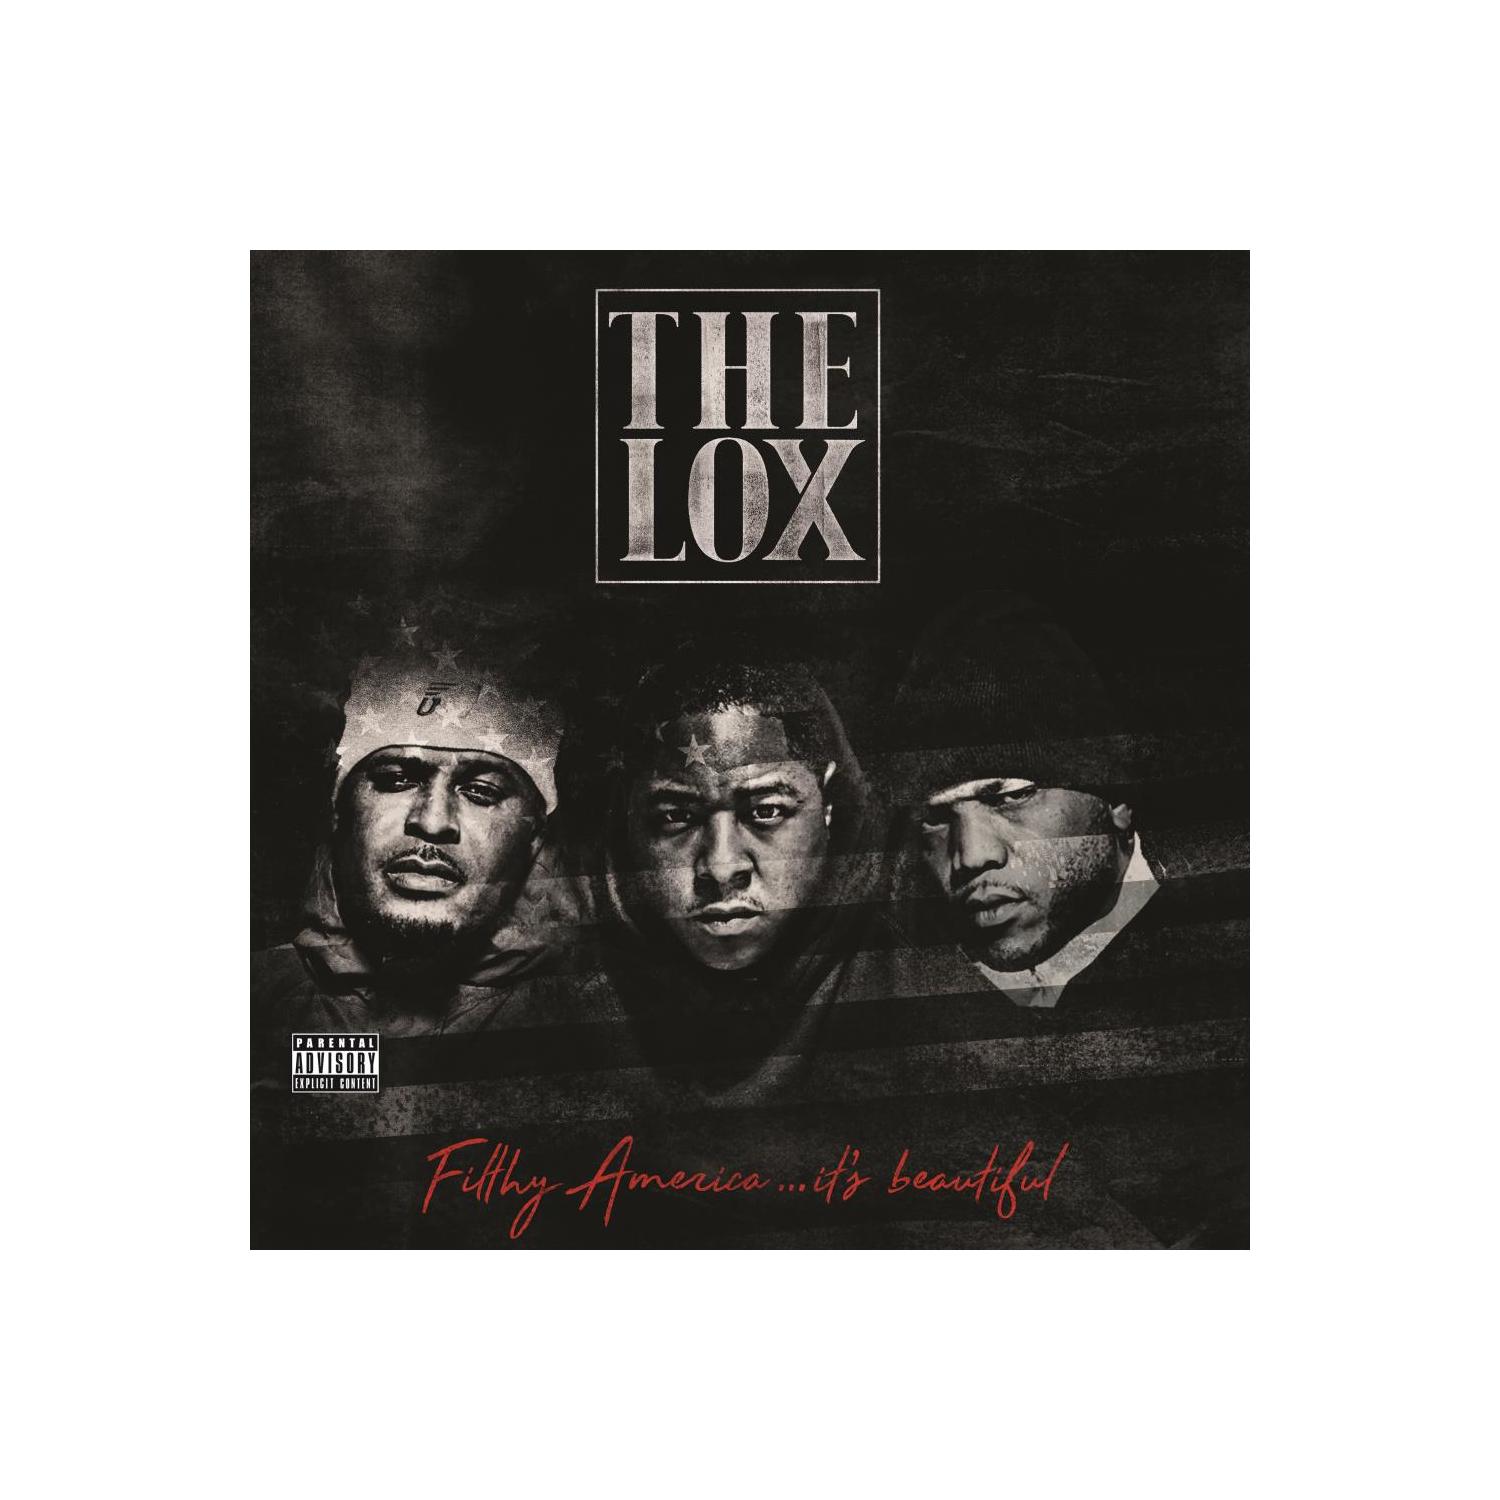 FILTHY AMERICA...IT'S BEAUTIFUL  LP -- THE LOX